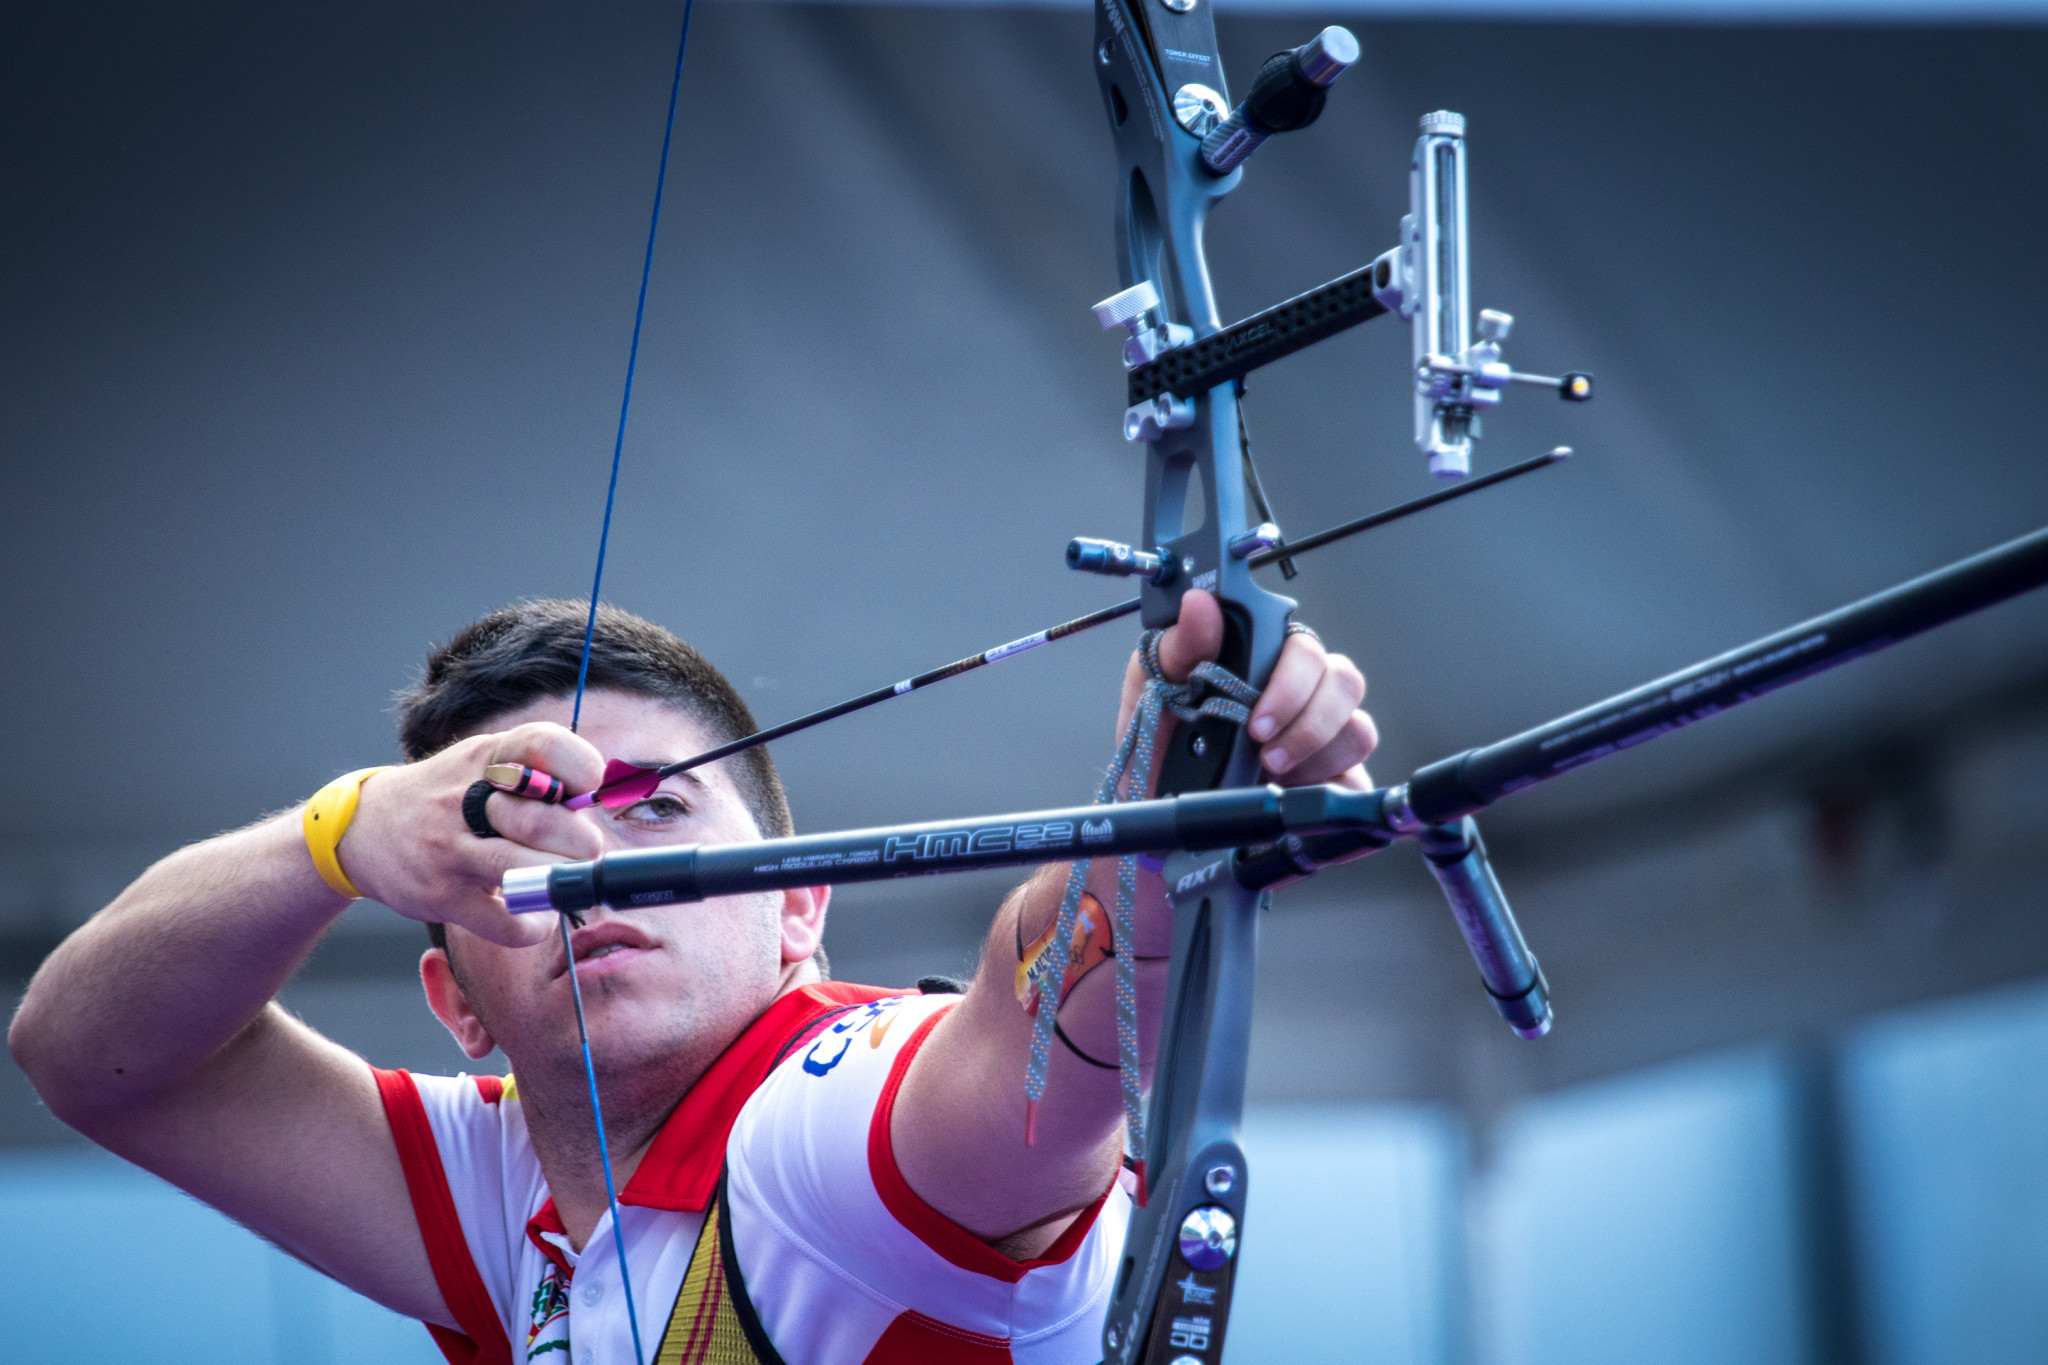 Miguel Alvarino Garcia of Spain clinched a straight sets final victory to win the men's individual recurve event at the Archery World Cup in Antalya ©Getty Images